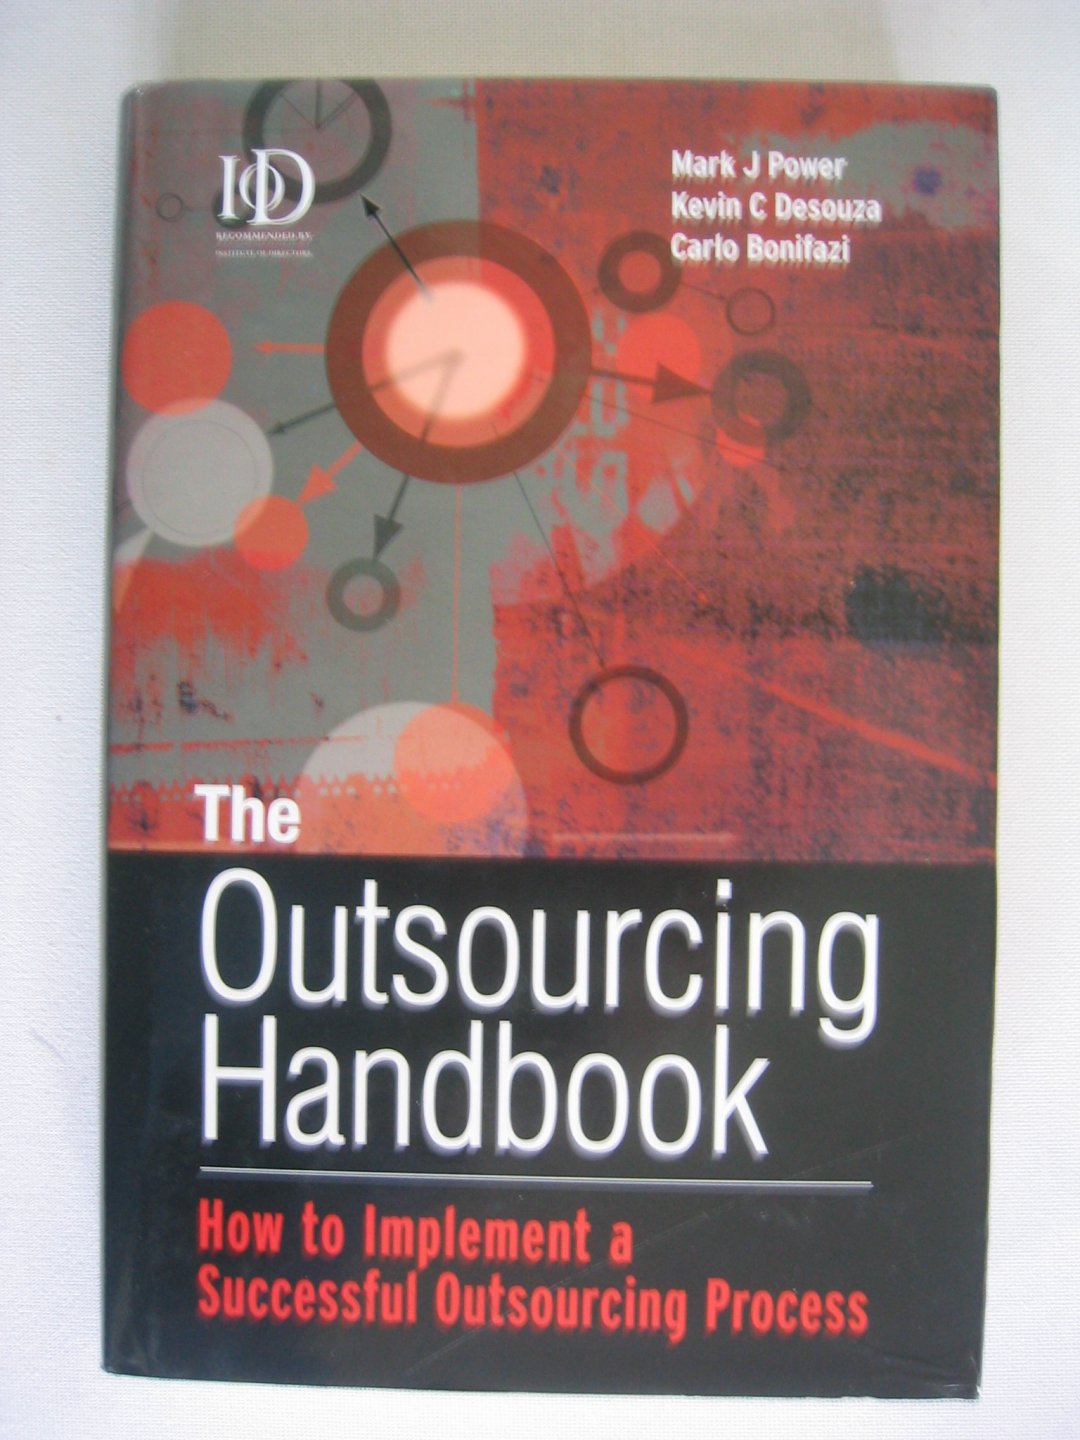 Power, Mark J. - The Outsourcing Handbook / How to Implement a Successful Outsourcing Process